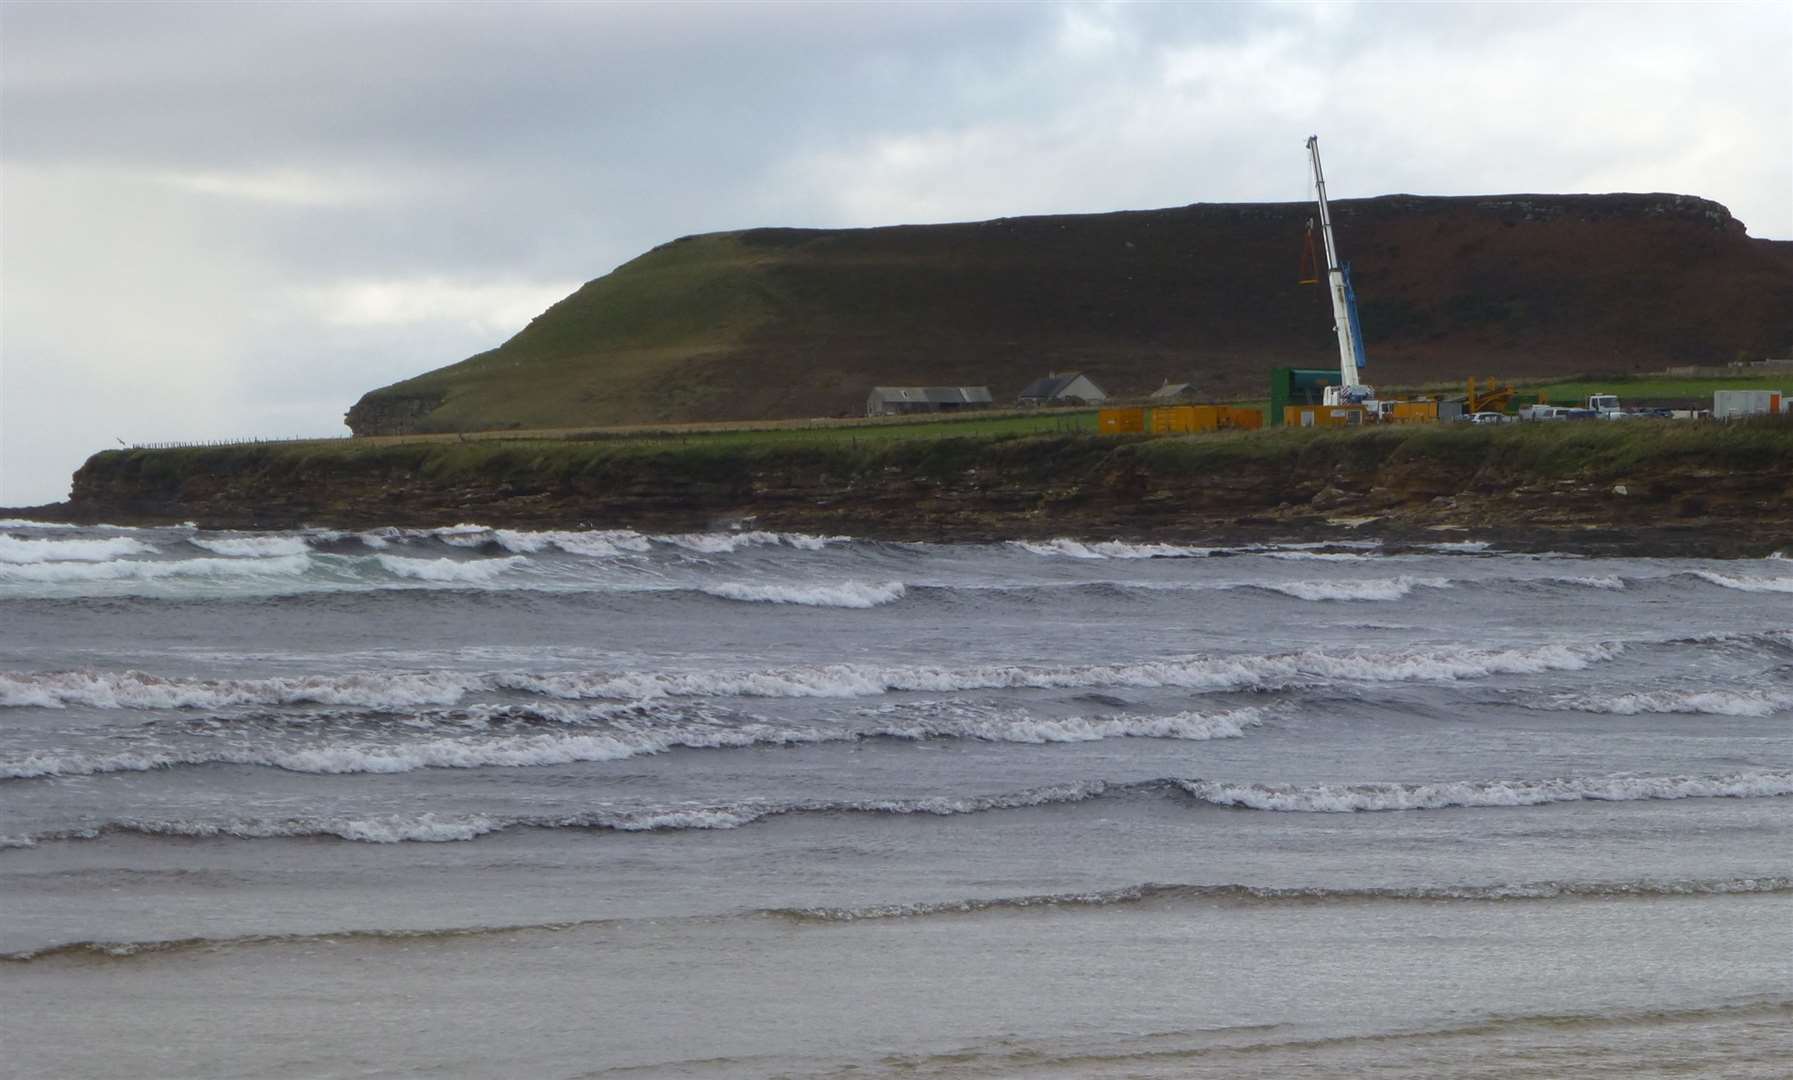 Work has begun on the construction of a new outfall pipe at Dunnet.